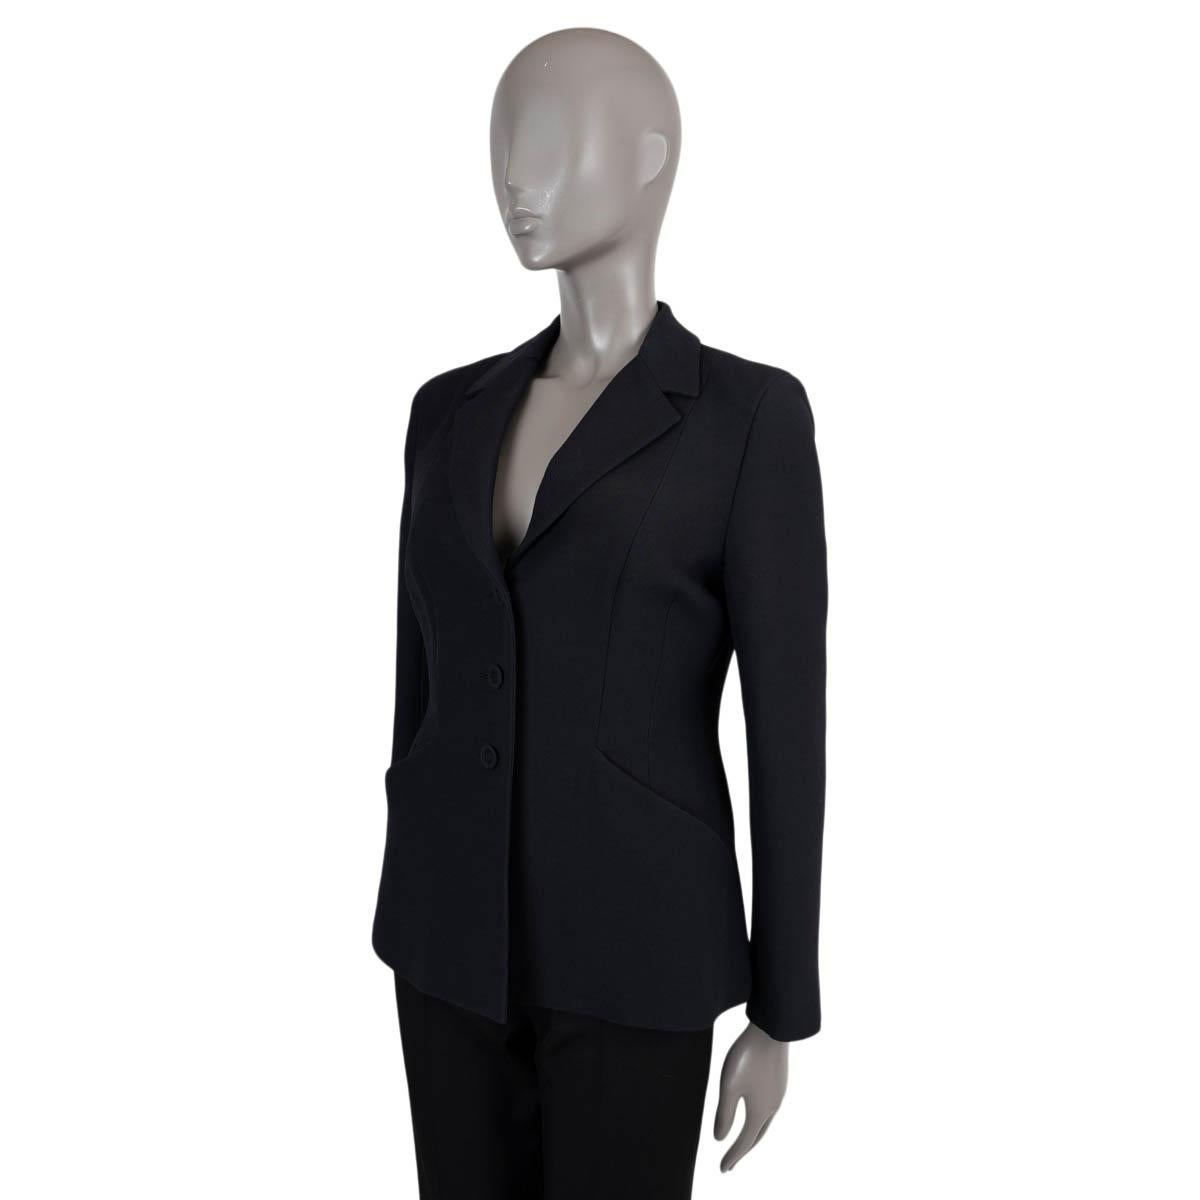 100% authentic Christian Dior 30 Montaigne Bar jacket in black wool (77%) and silk (23%). Features a tailored, yet supple sihloutte with delicately highlight waist, notch lapels and open pockets. Closes with fabric covered buttons on the front and